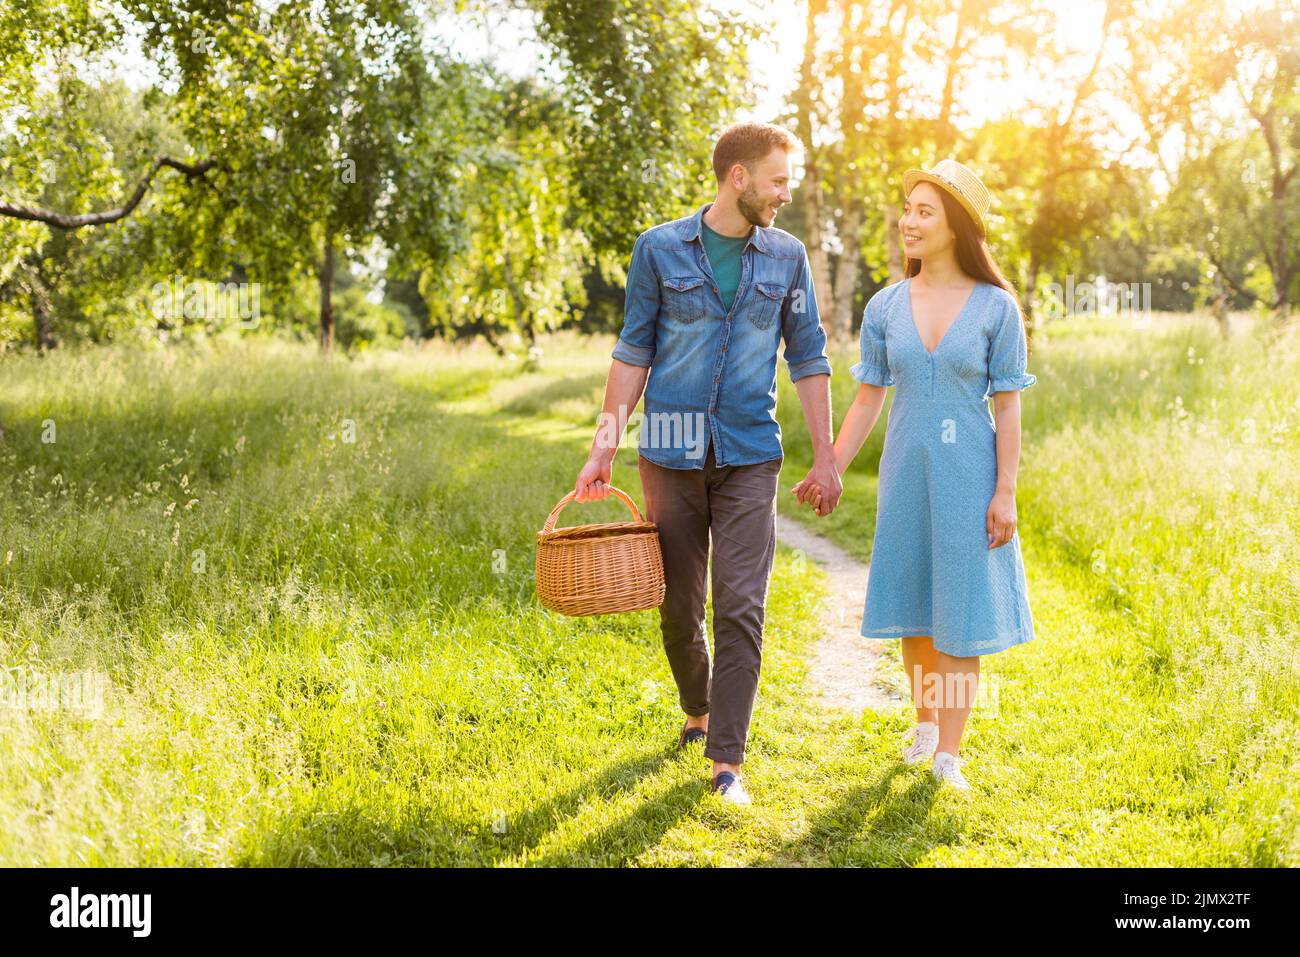 Young multiracial enamored couple walking park holding hands Stock Photo